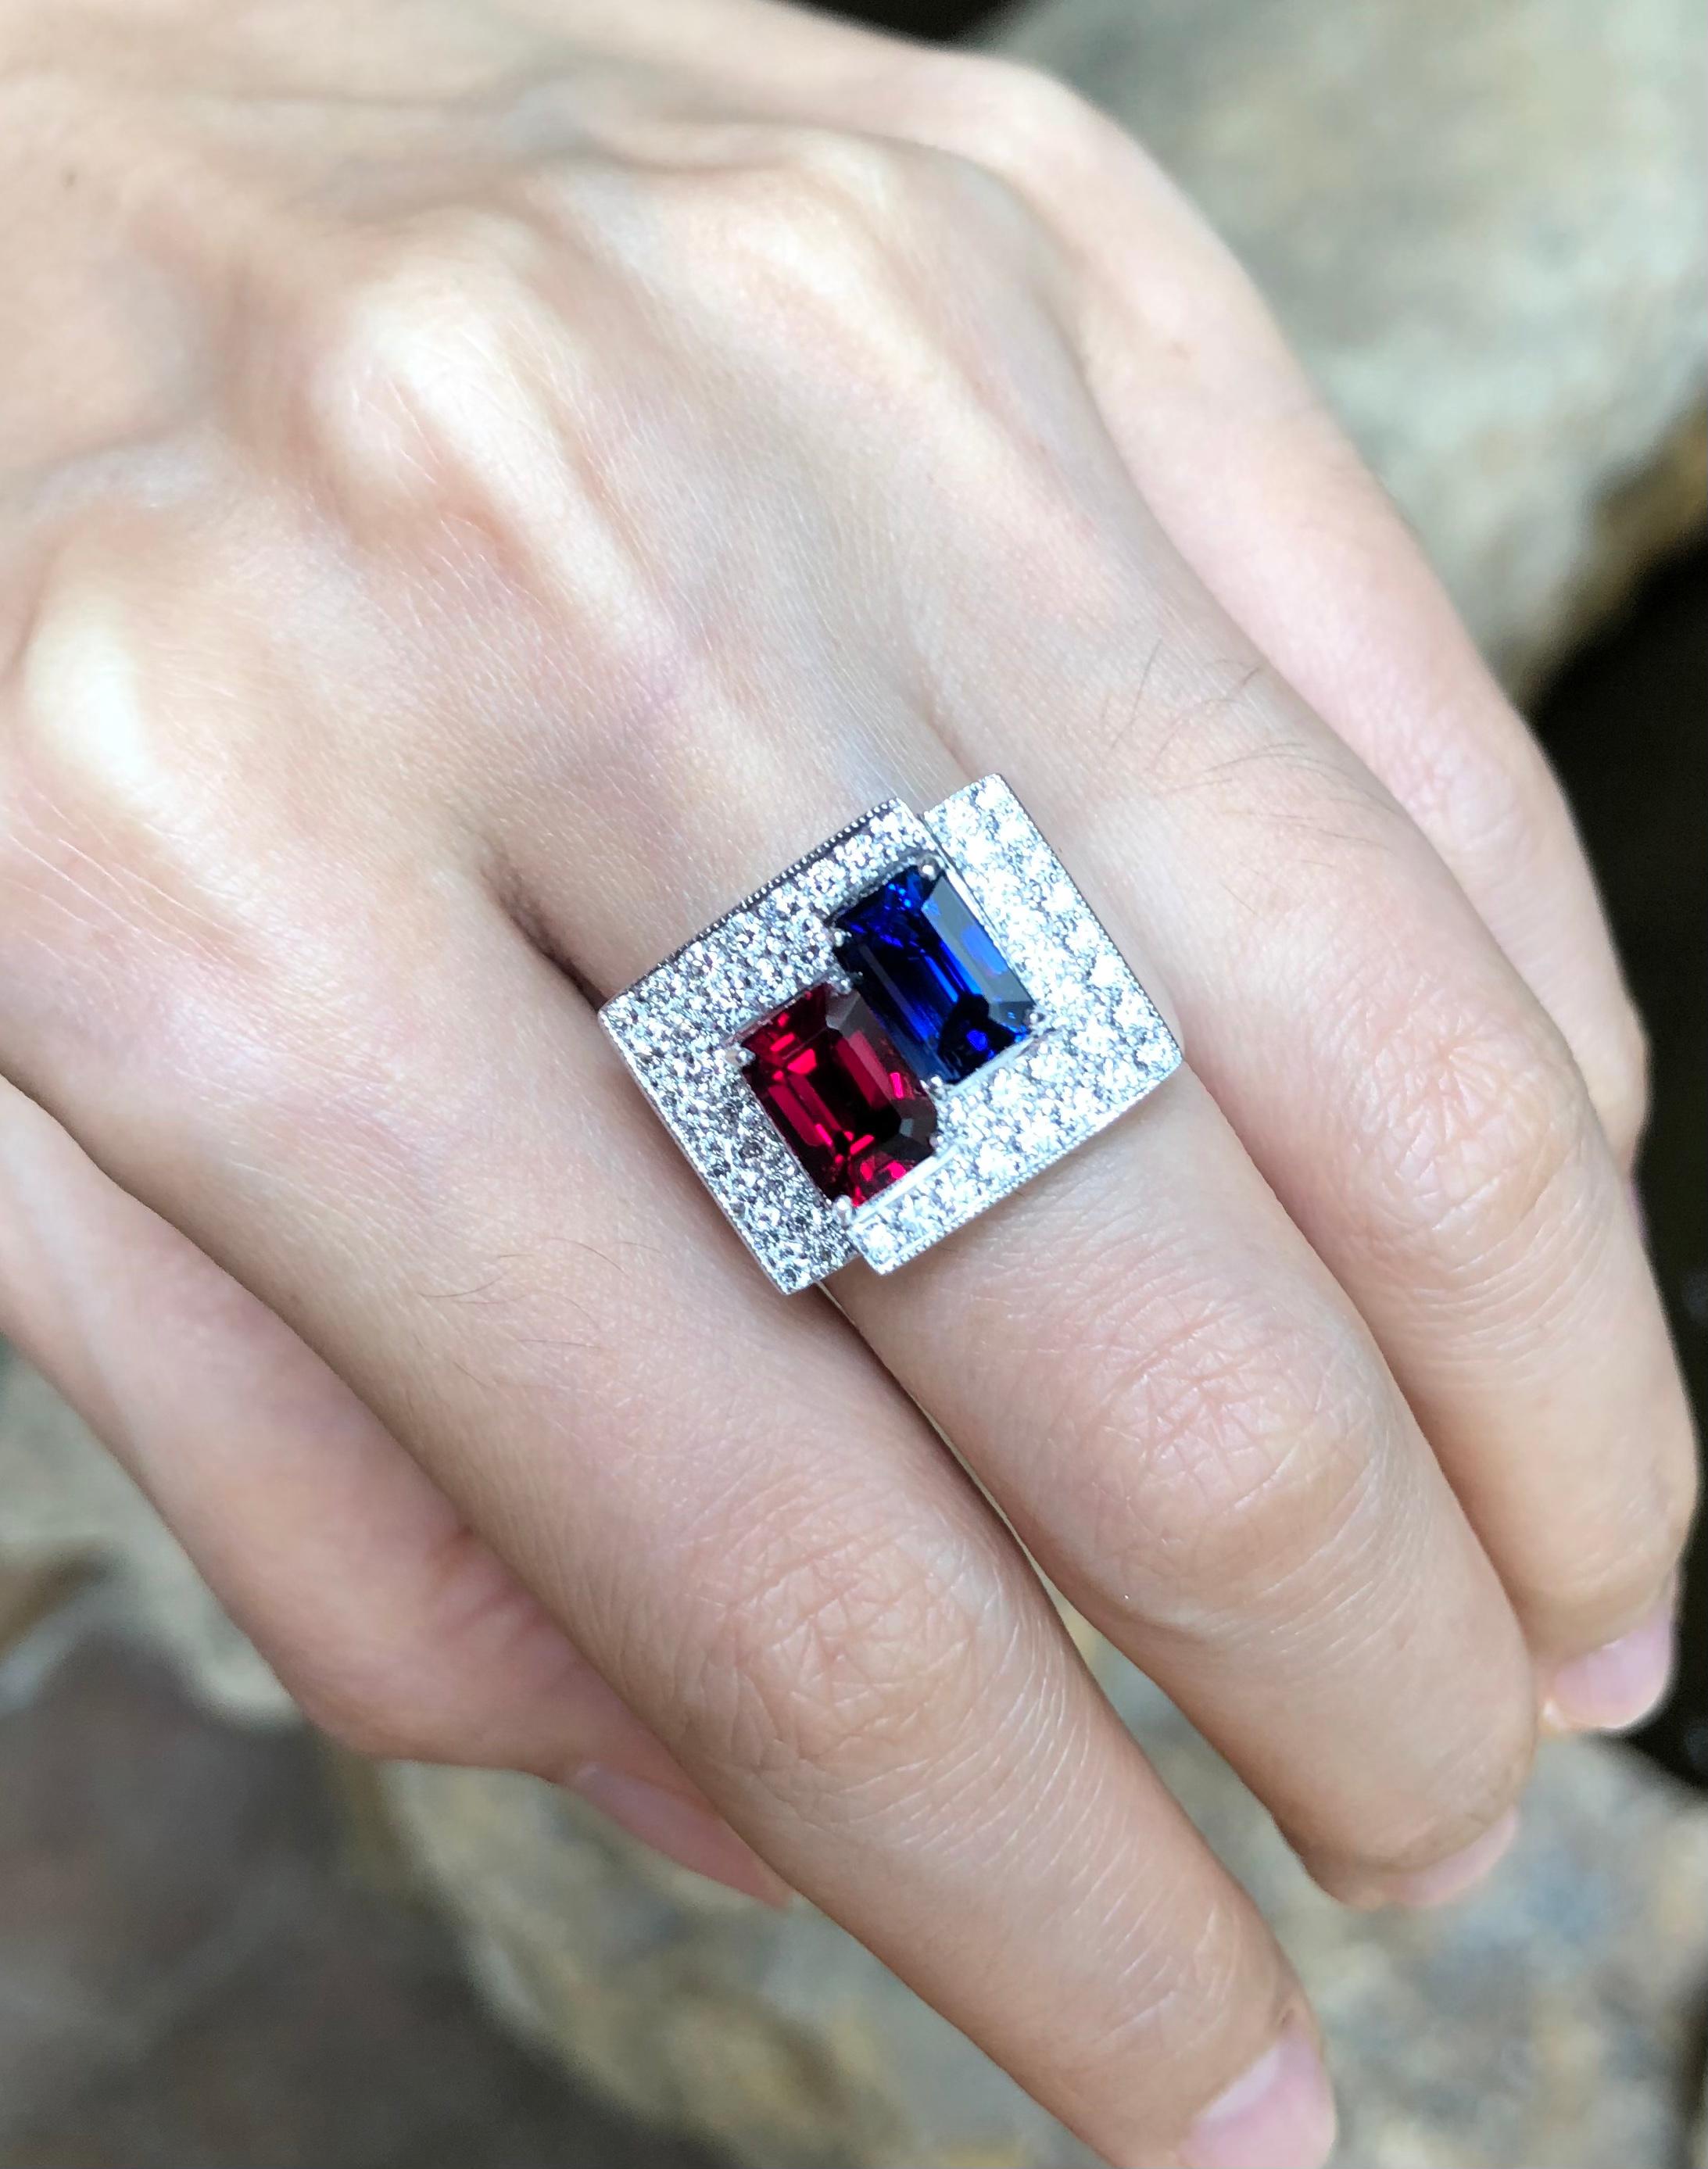 Ruby 2.02 carats, Blue Sapphire 1.66 carats with Diamond 0.79 carat Ring set in 18 Karat White Gold Settings

Width:  1.8 cm 
Length:  1.4 cm
Ring Size: 51
Total Weight: 14.51 grams

